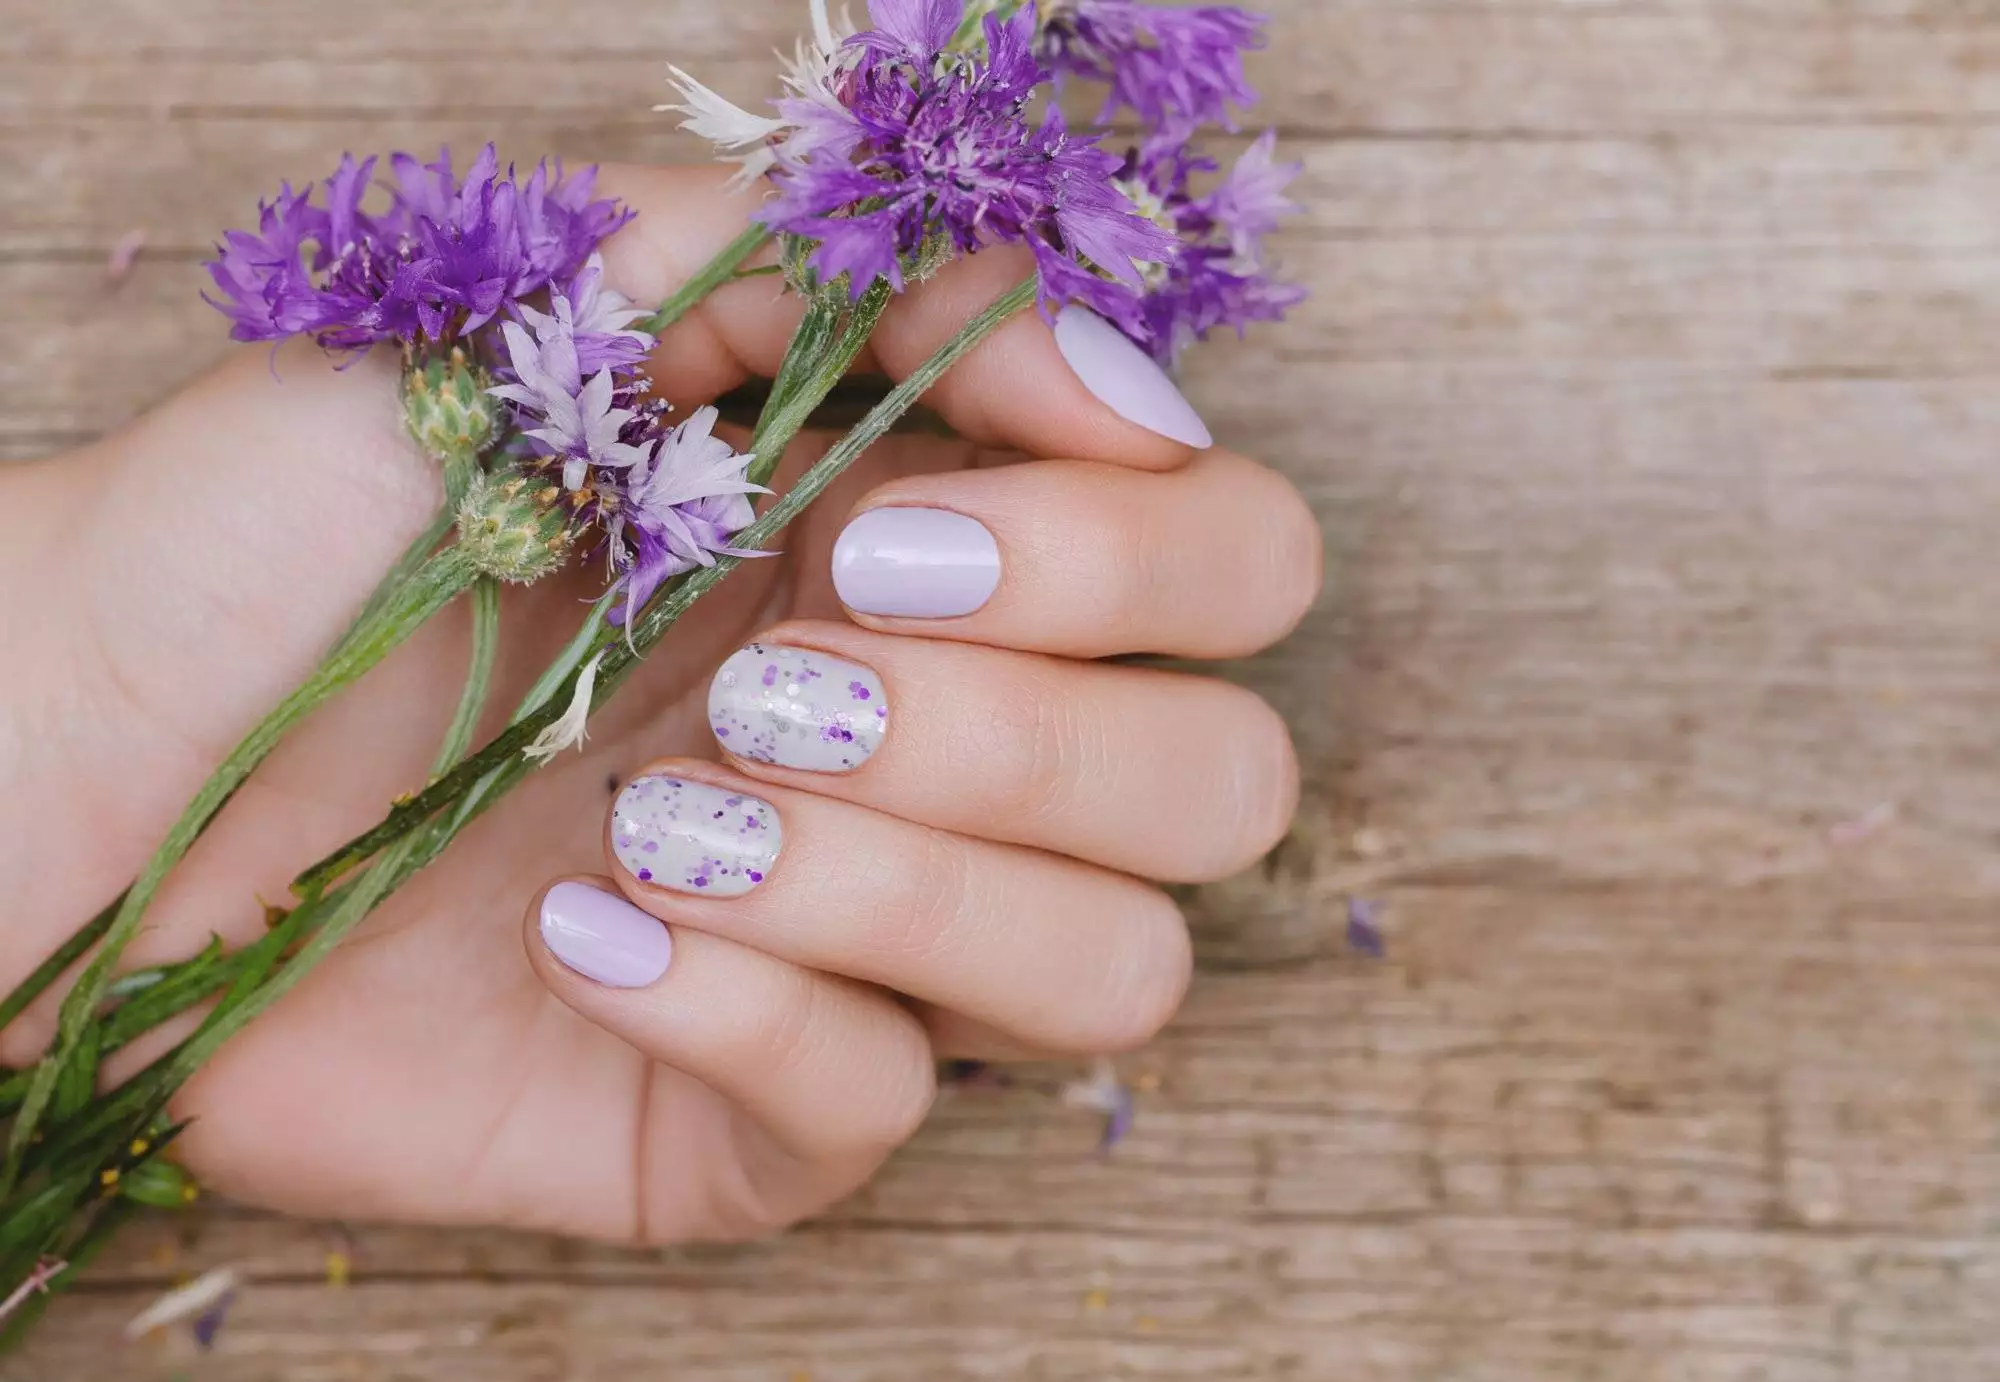 Female hands with purple nail design holding purple flowers.